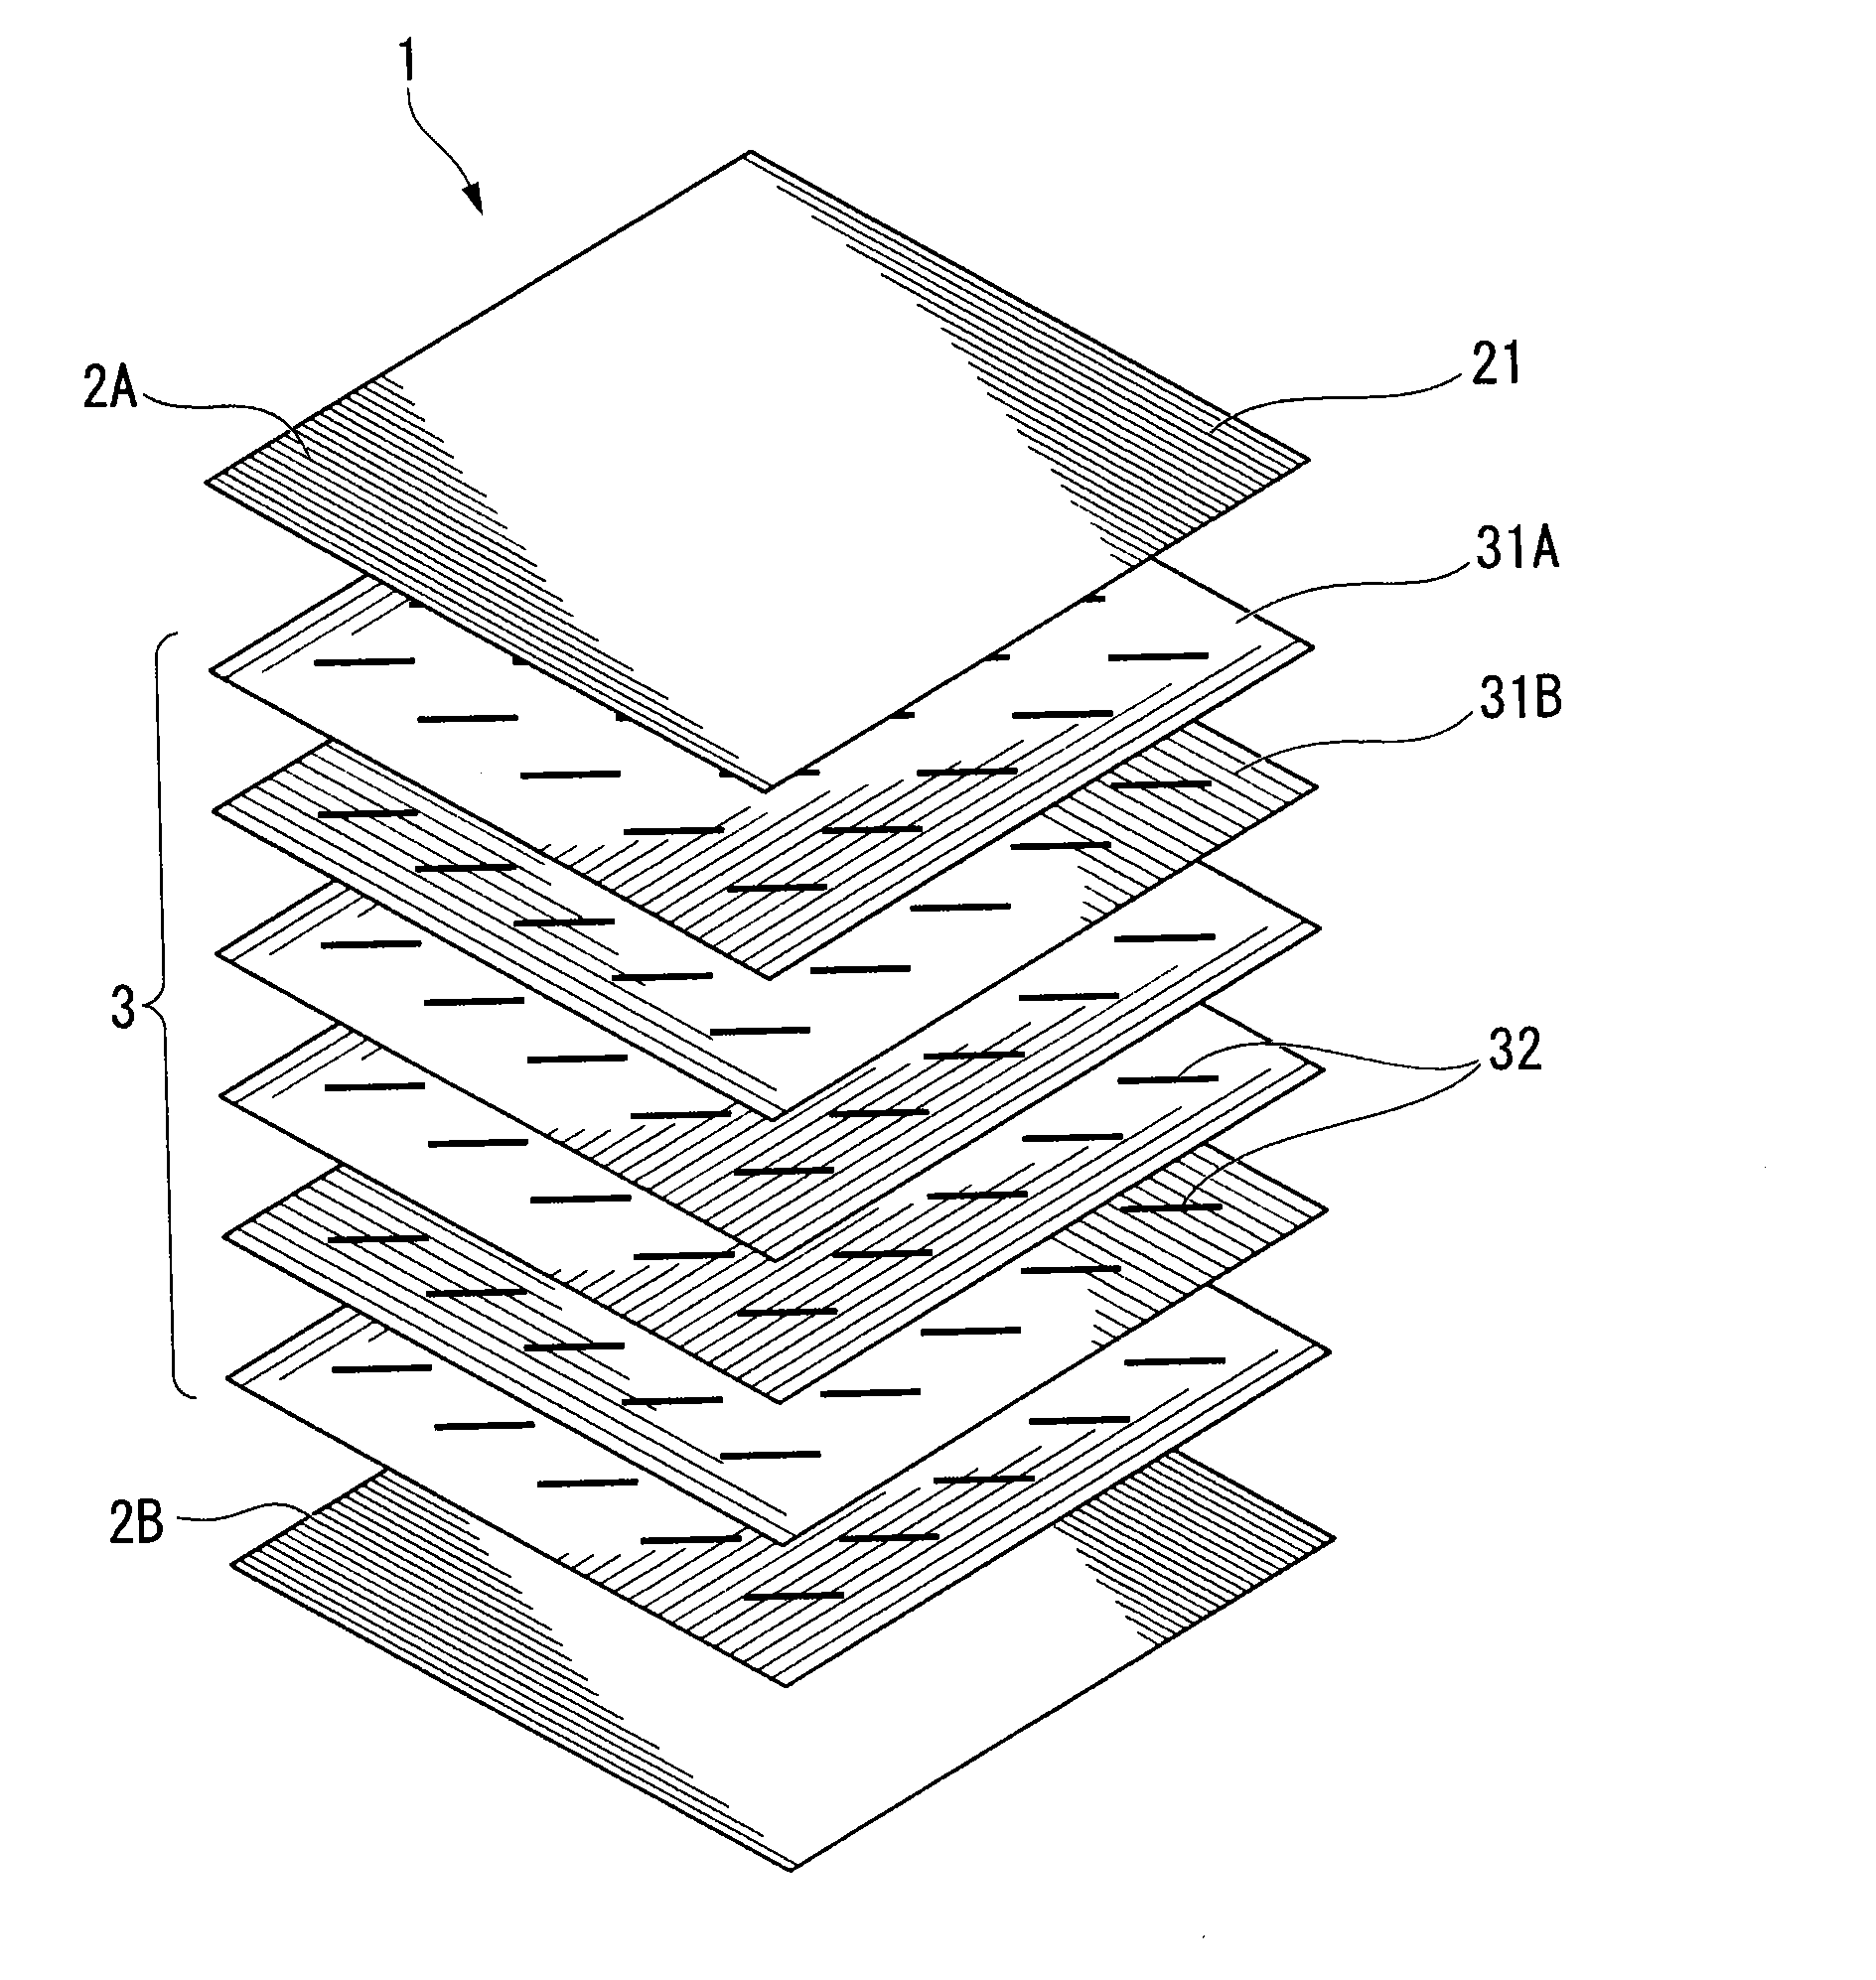 Carbon-fiber-reinforced thermoplastic-resin composite material and molded body using the same